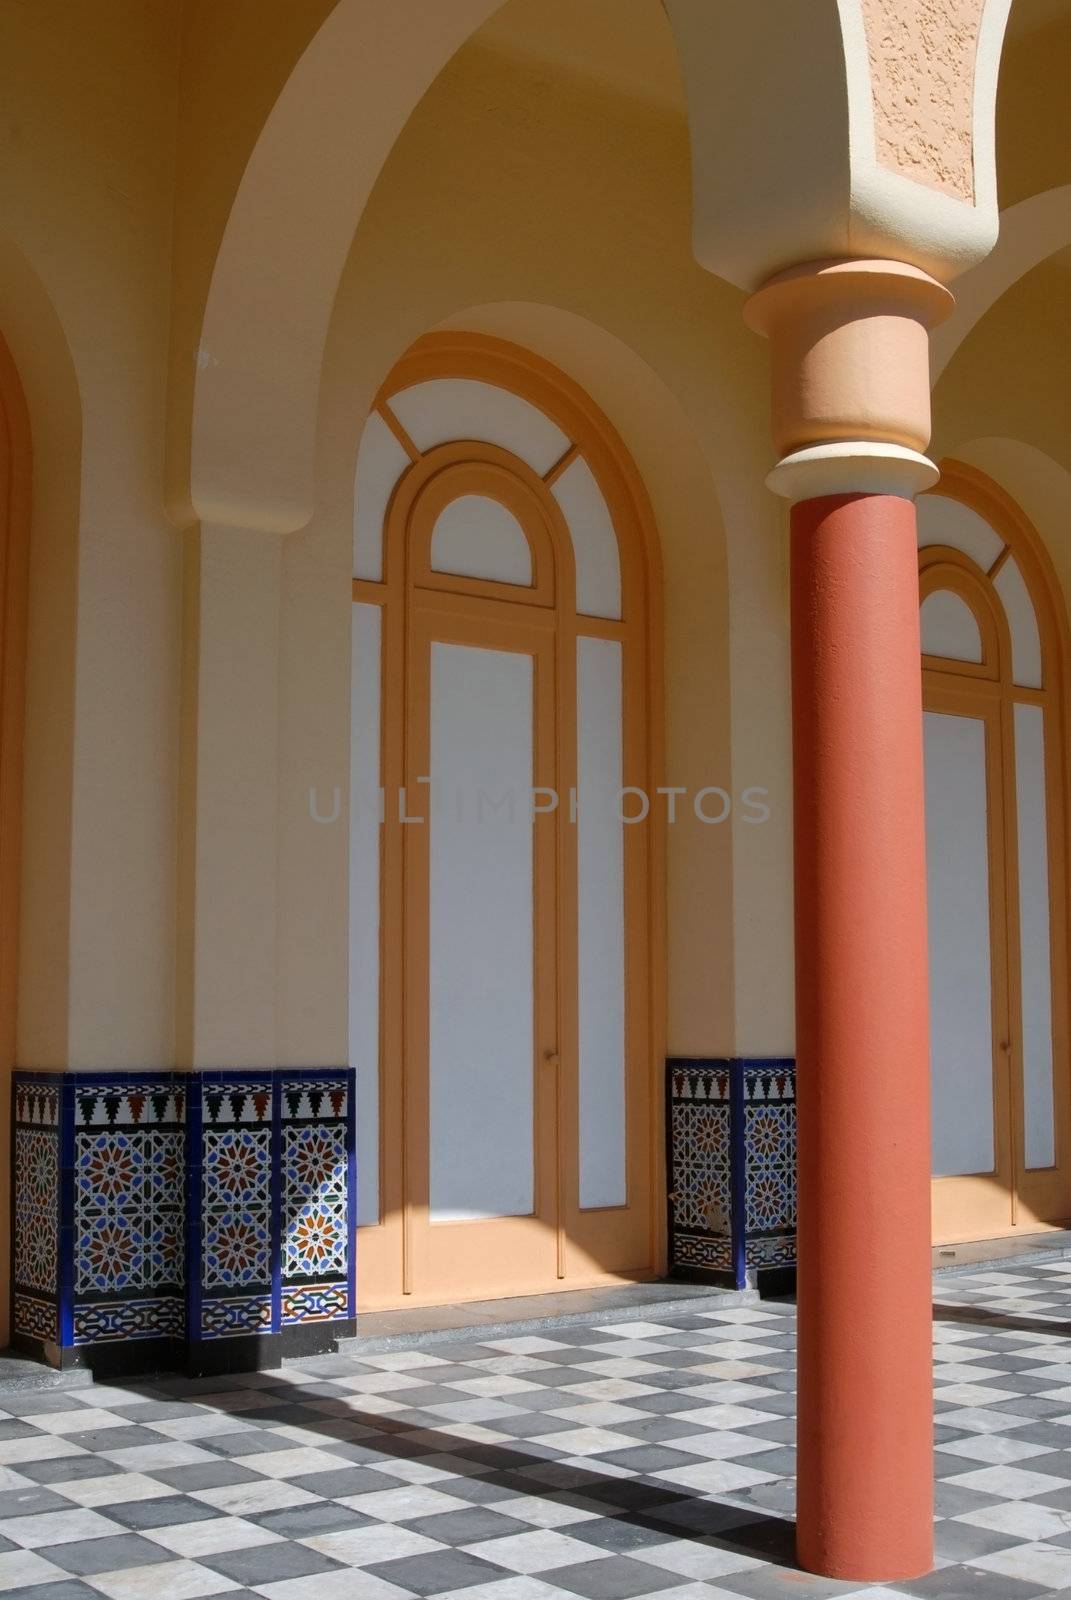 Architectural detail of an ancient building. Column and archs